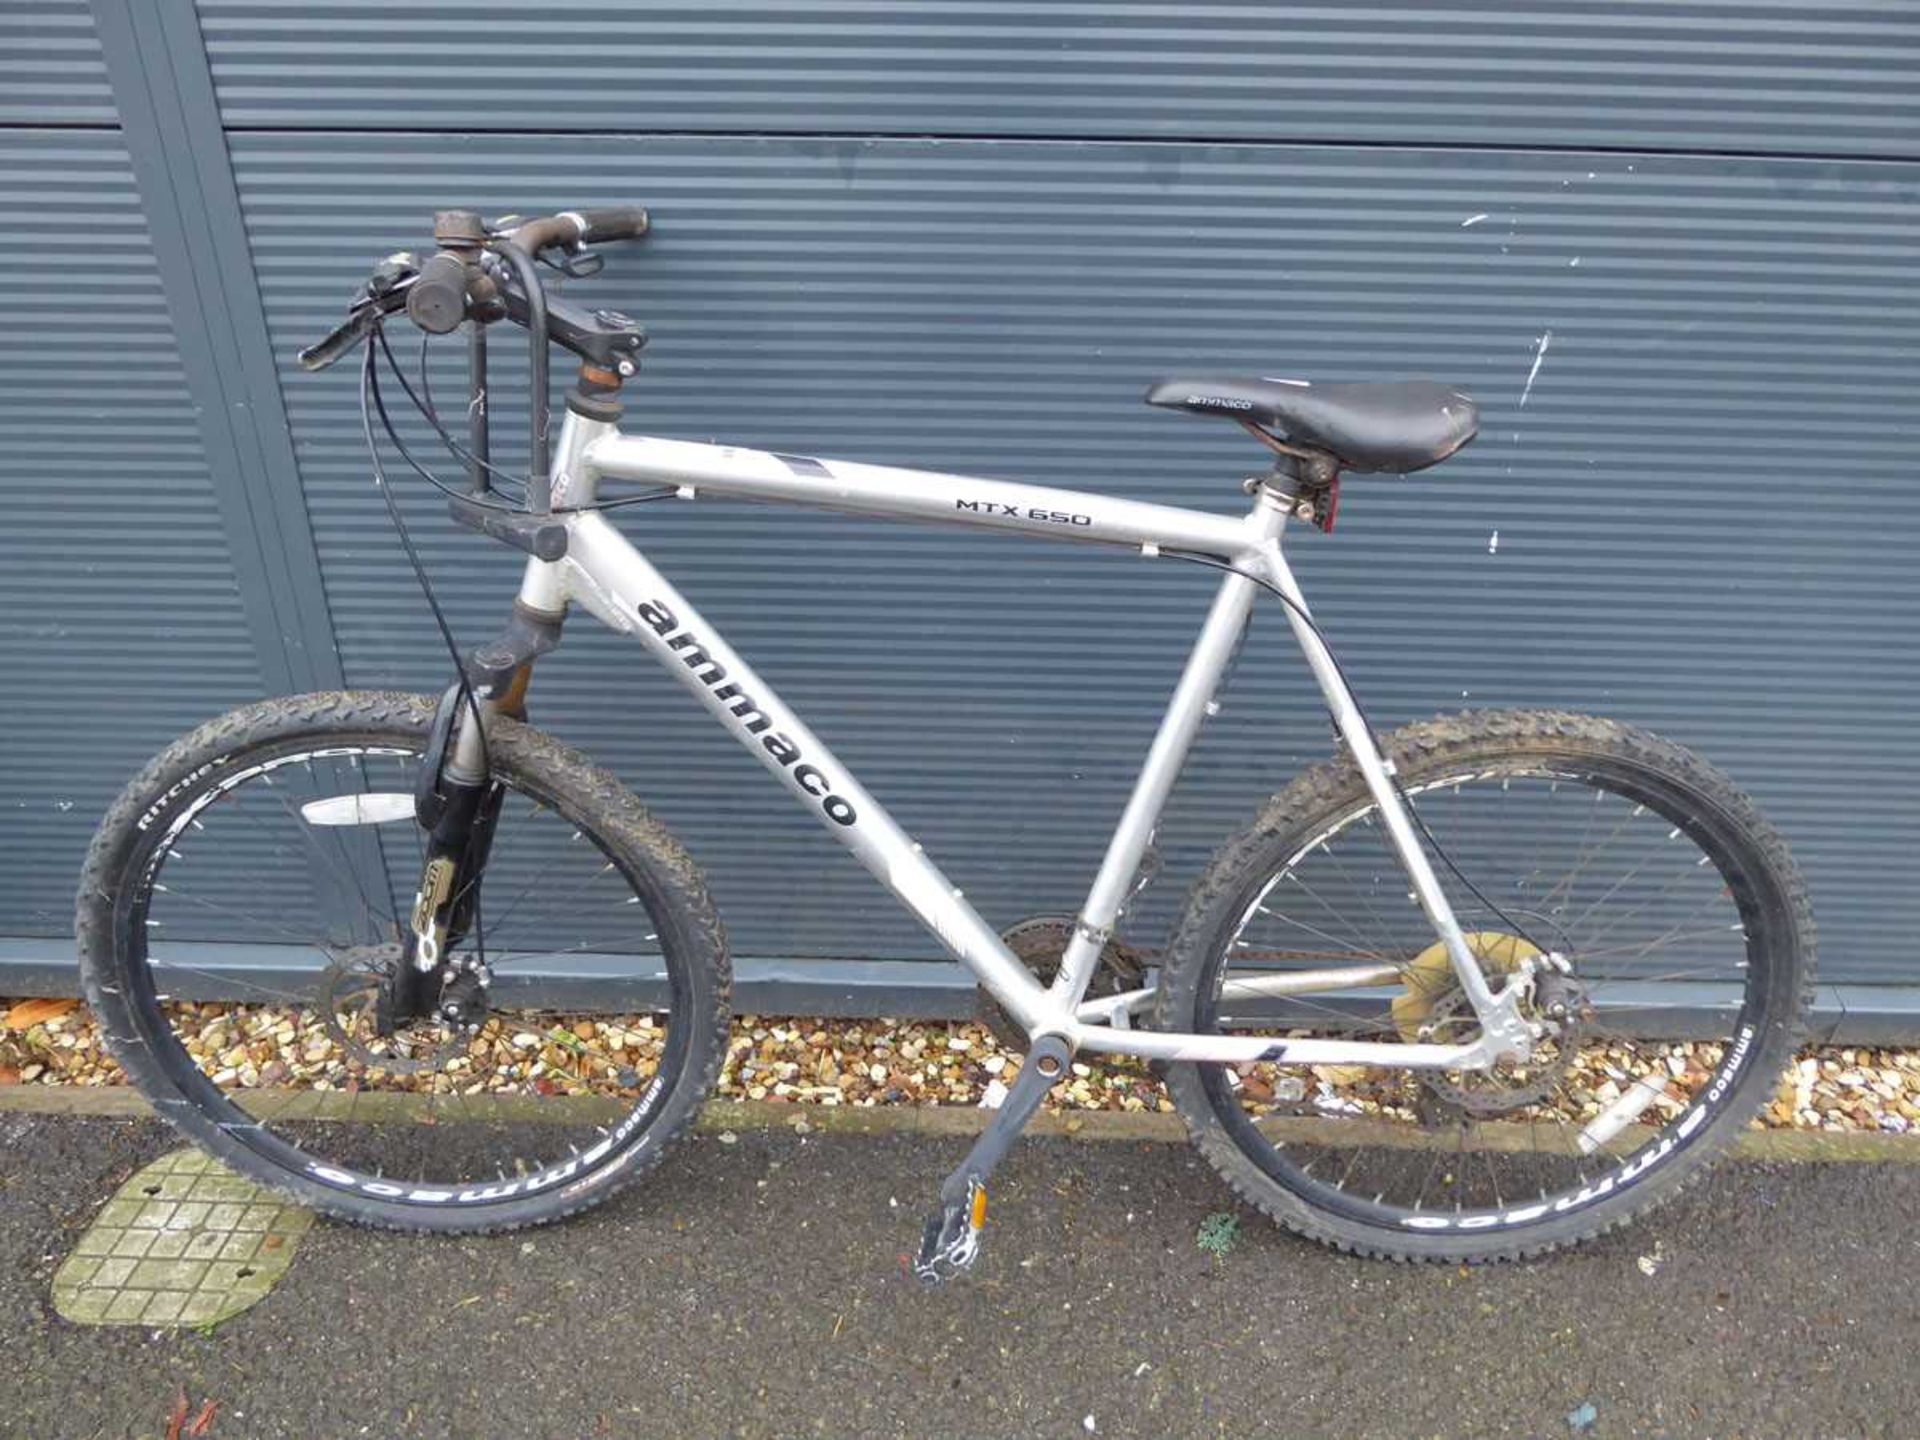 Ammaco silver gents mountain bike - Image 2 of 3